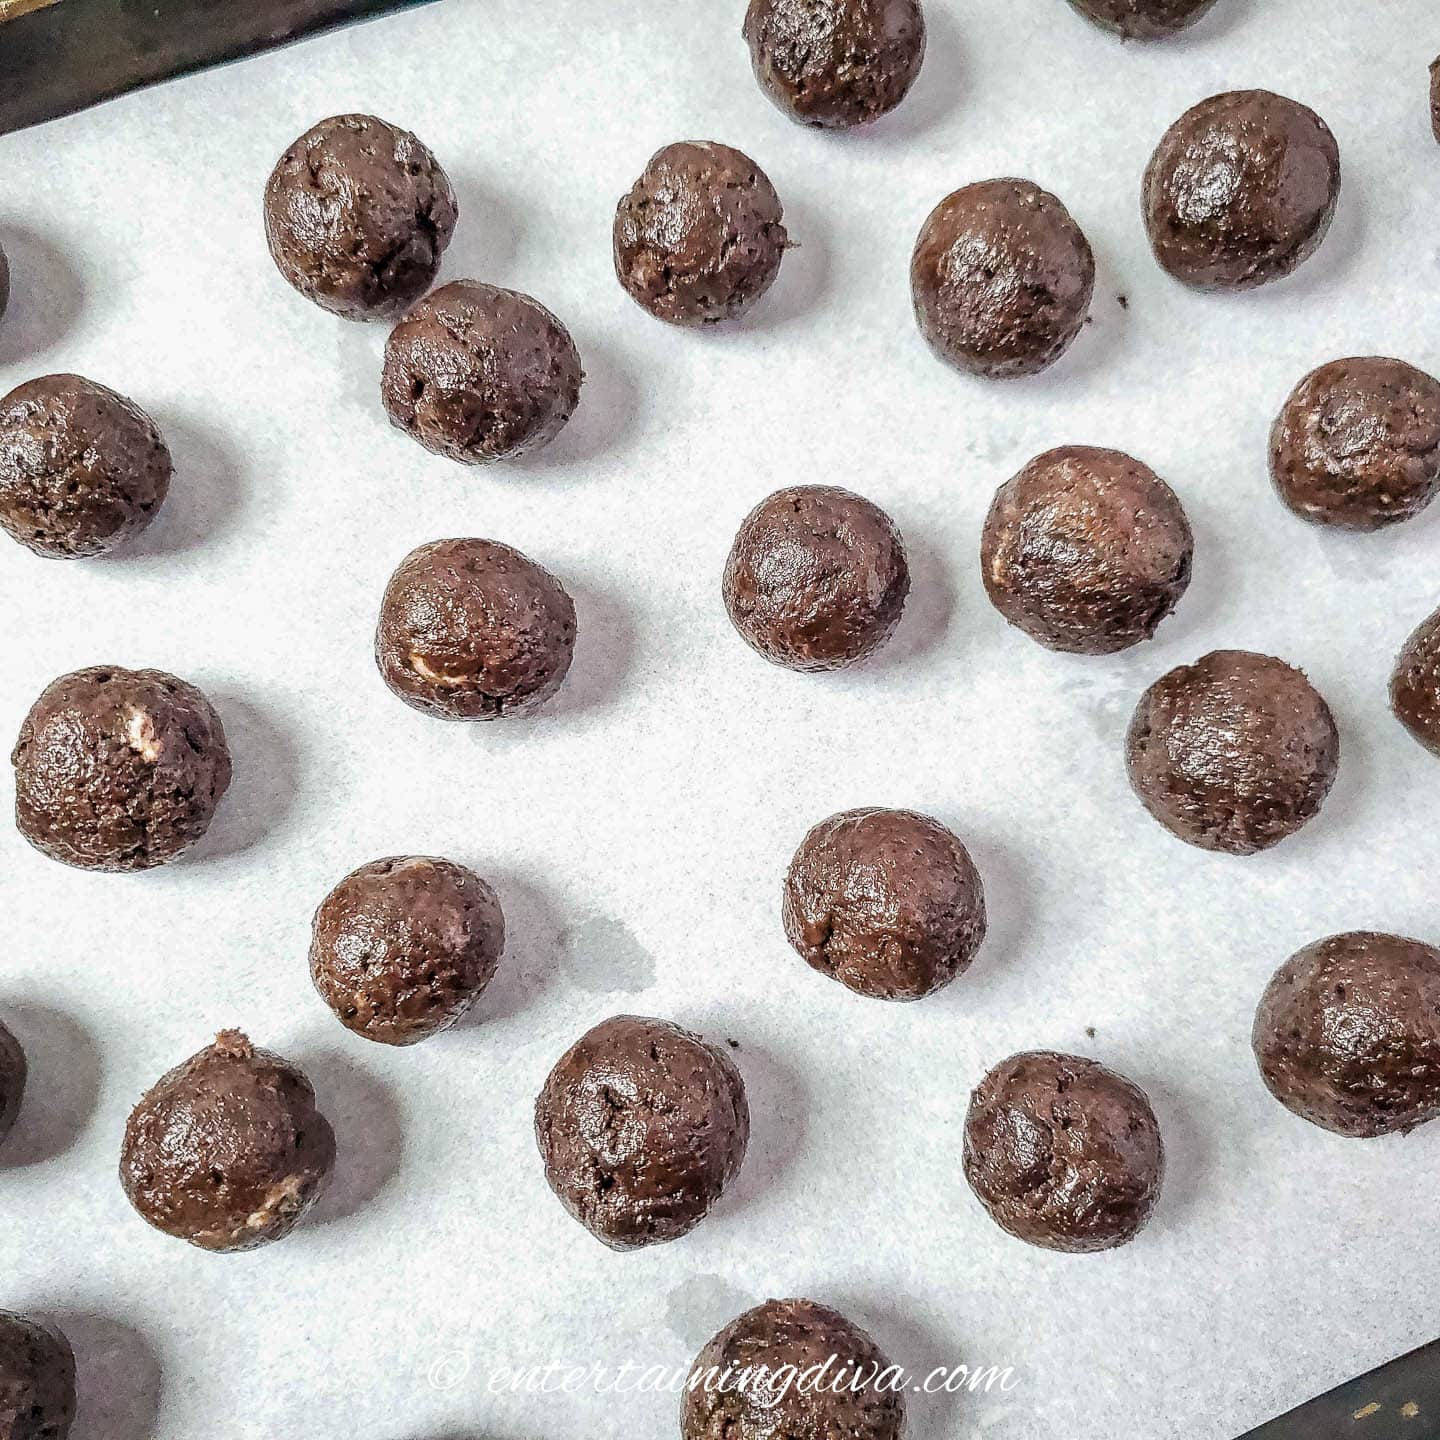 Rolled Oreo balls on a parchment-covered baking sheet